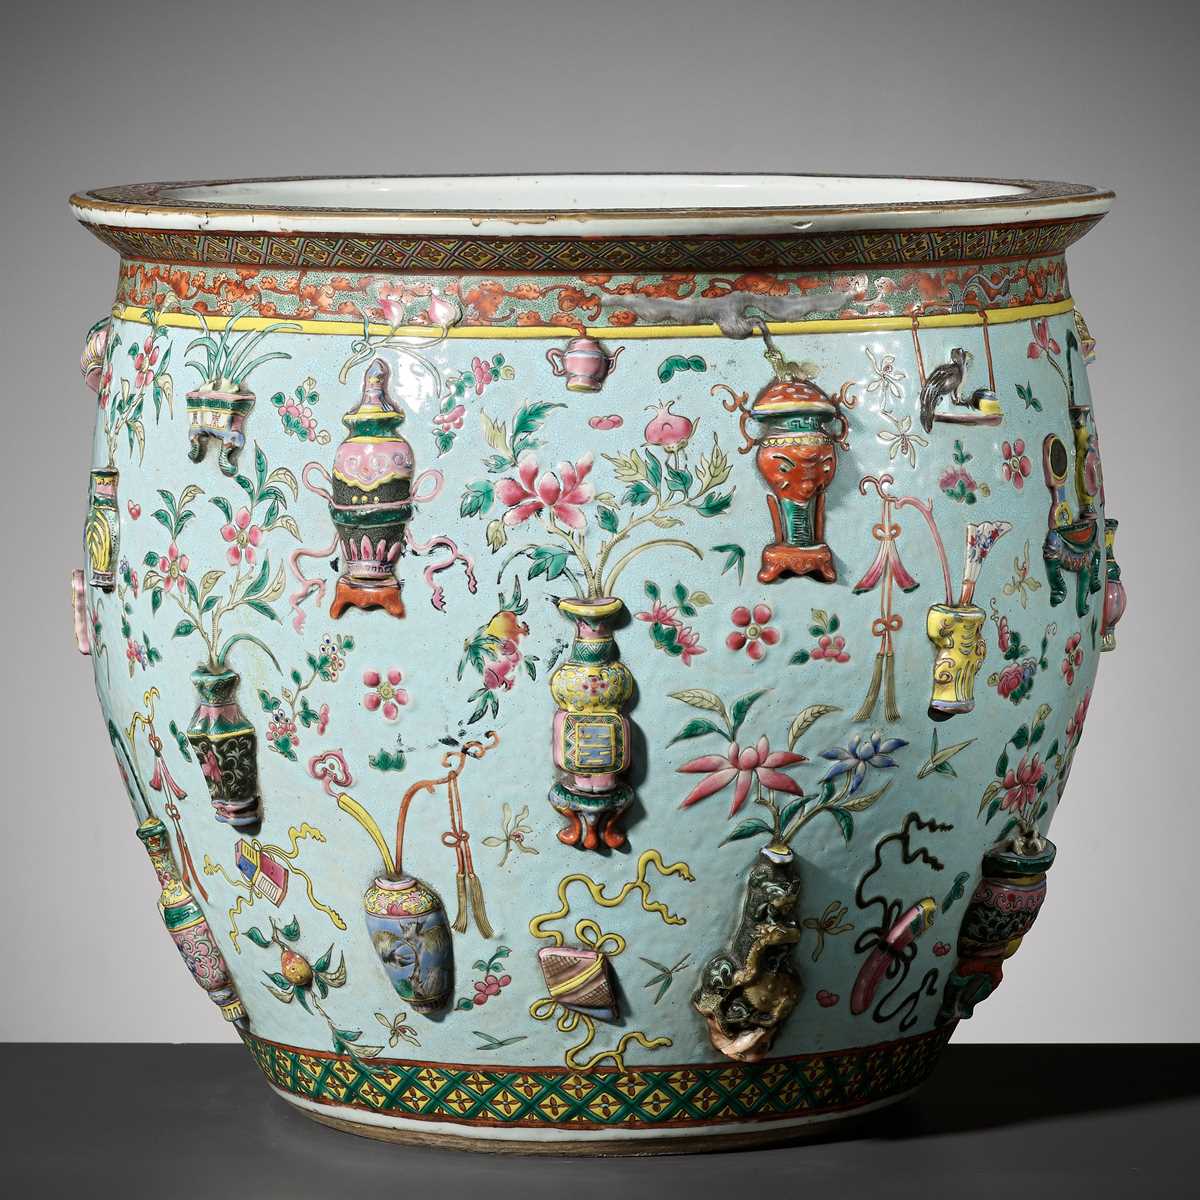 Lot 114 - A LARGE FAMILLE ROSE RELIEF-MOLDED FISHBOWL, QING DYNASTY